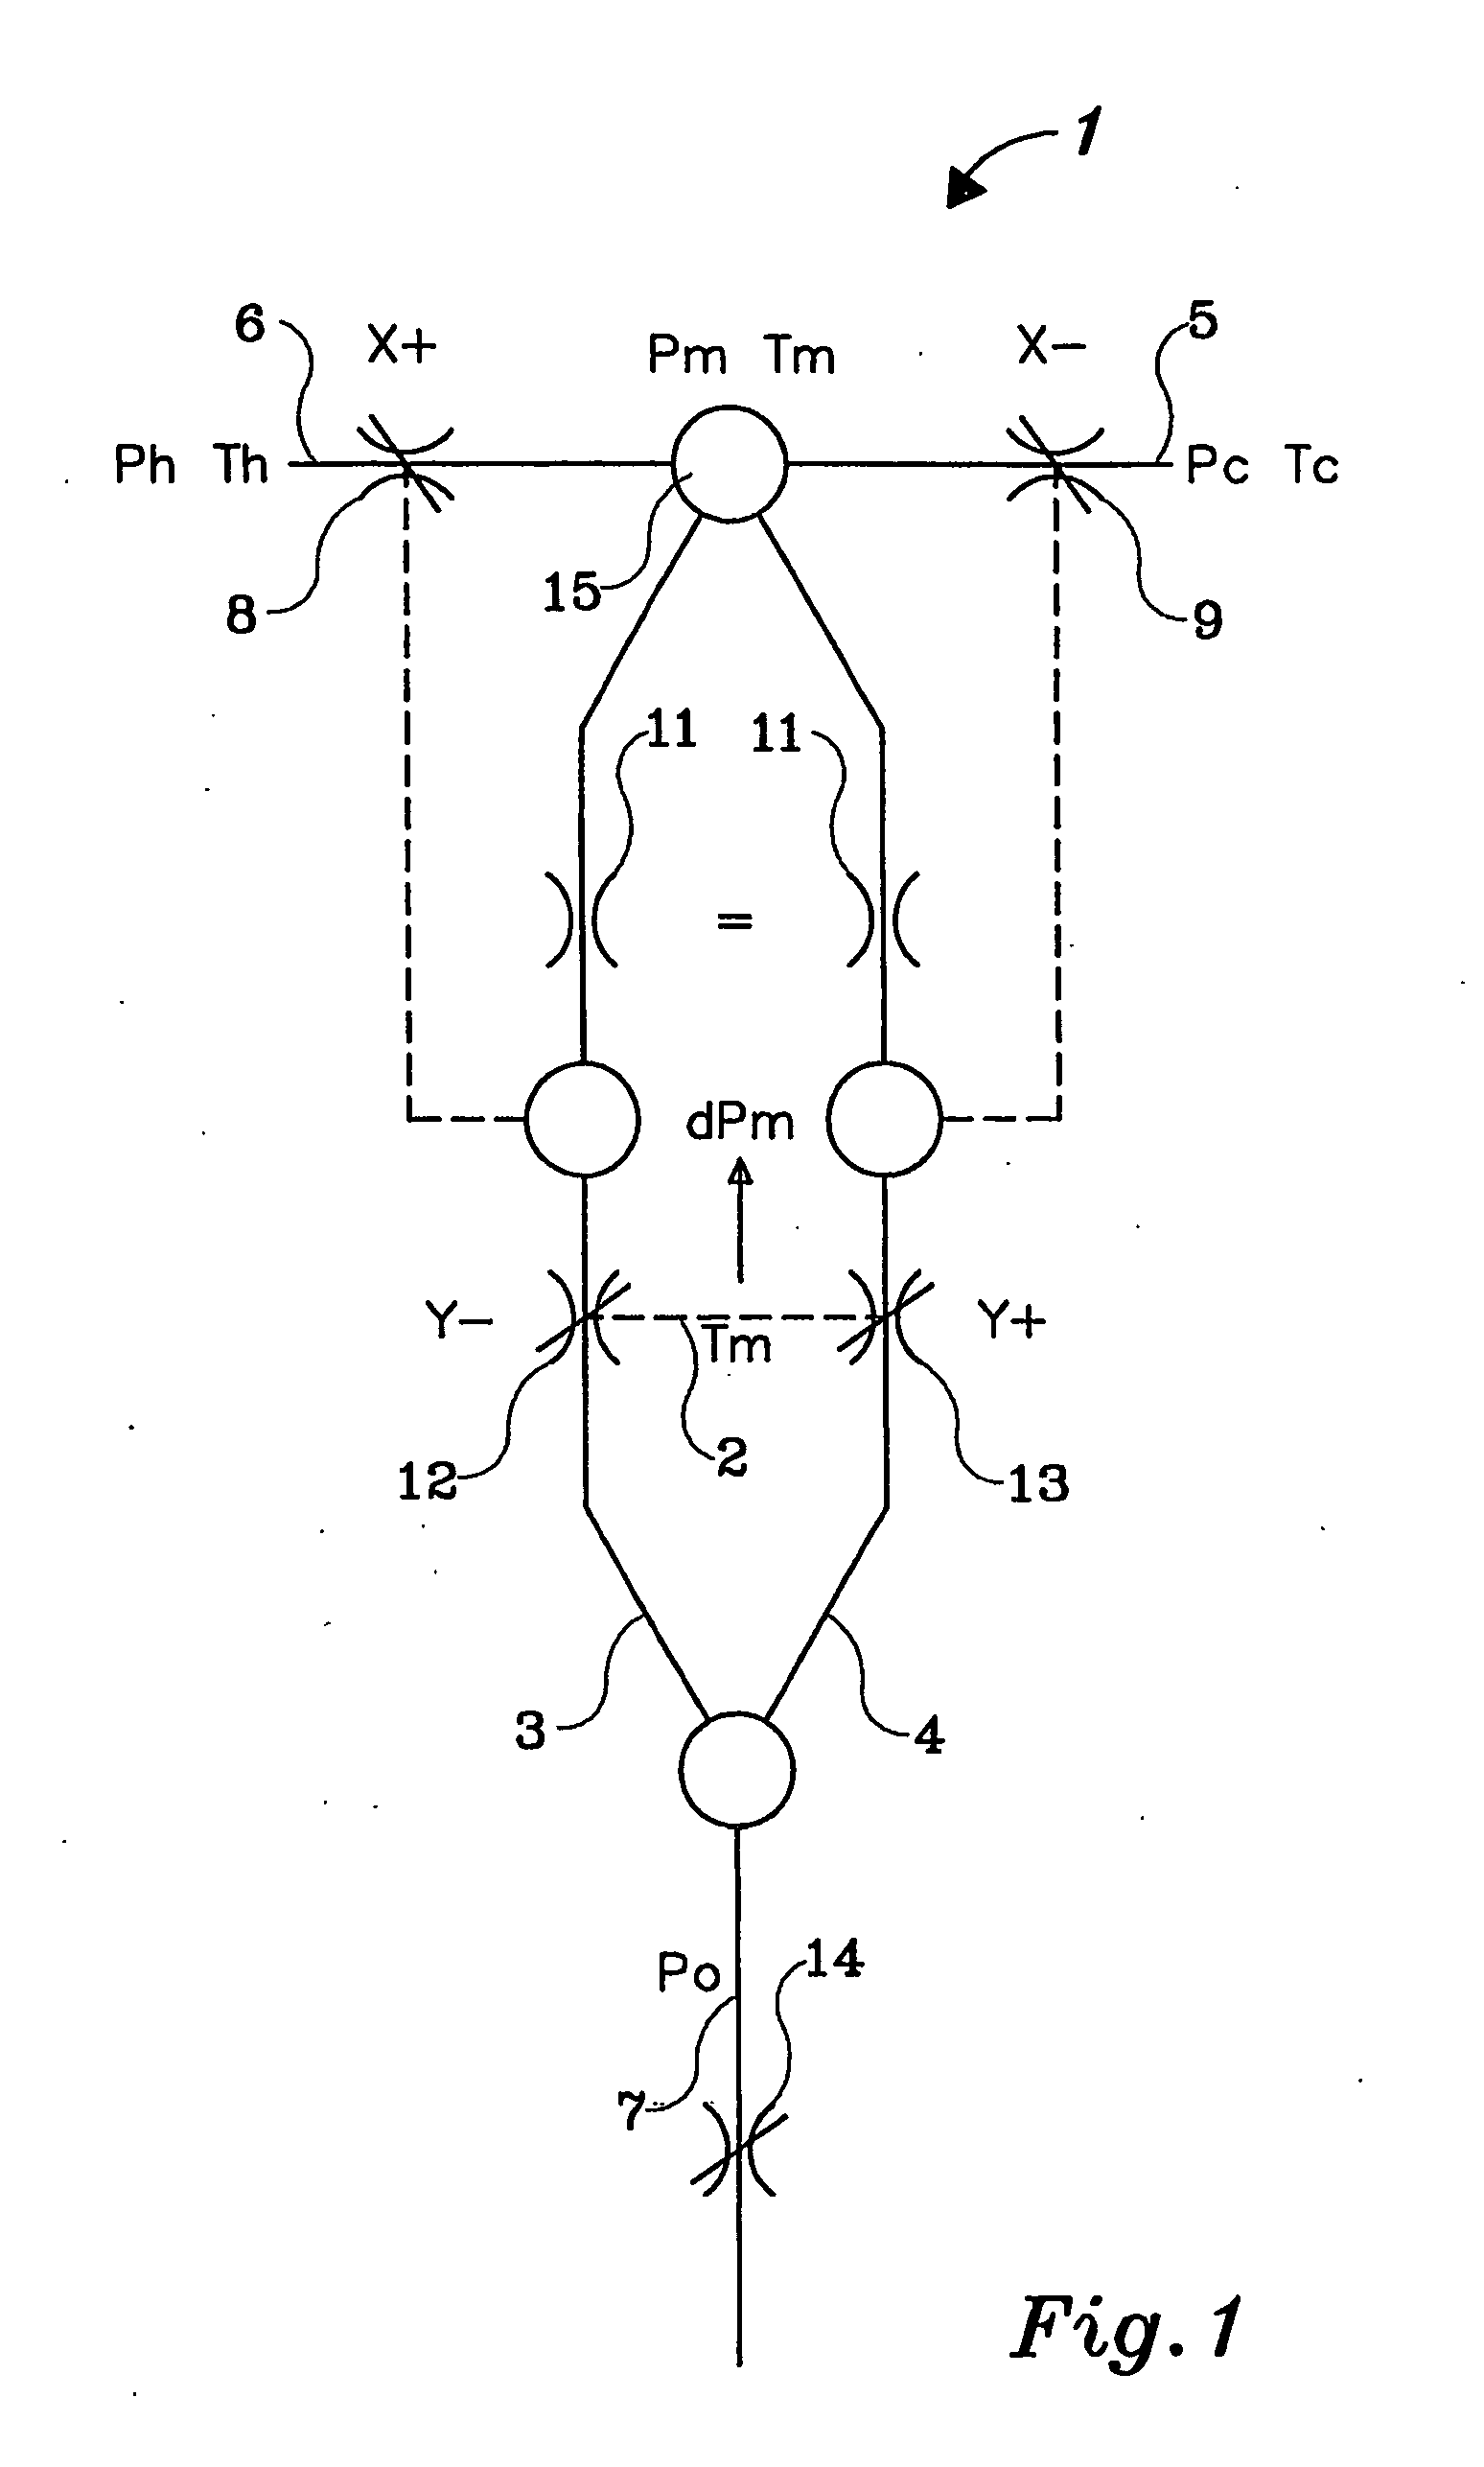 Hydraulically controlled thermostatic mixing valve